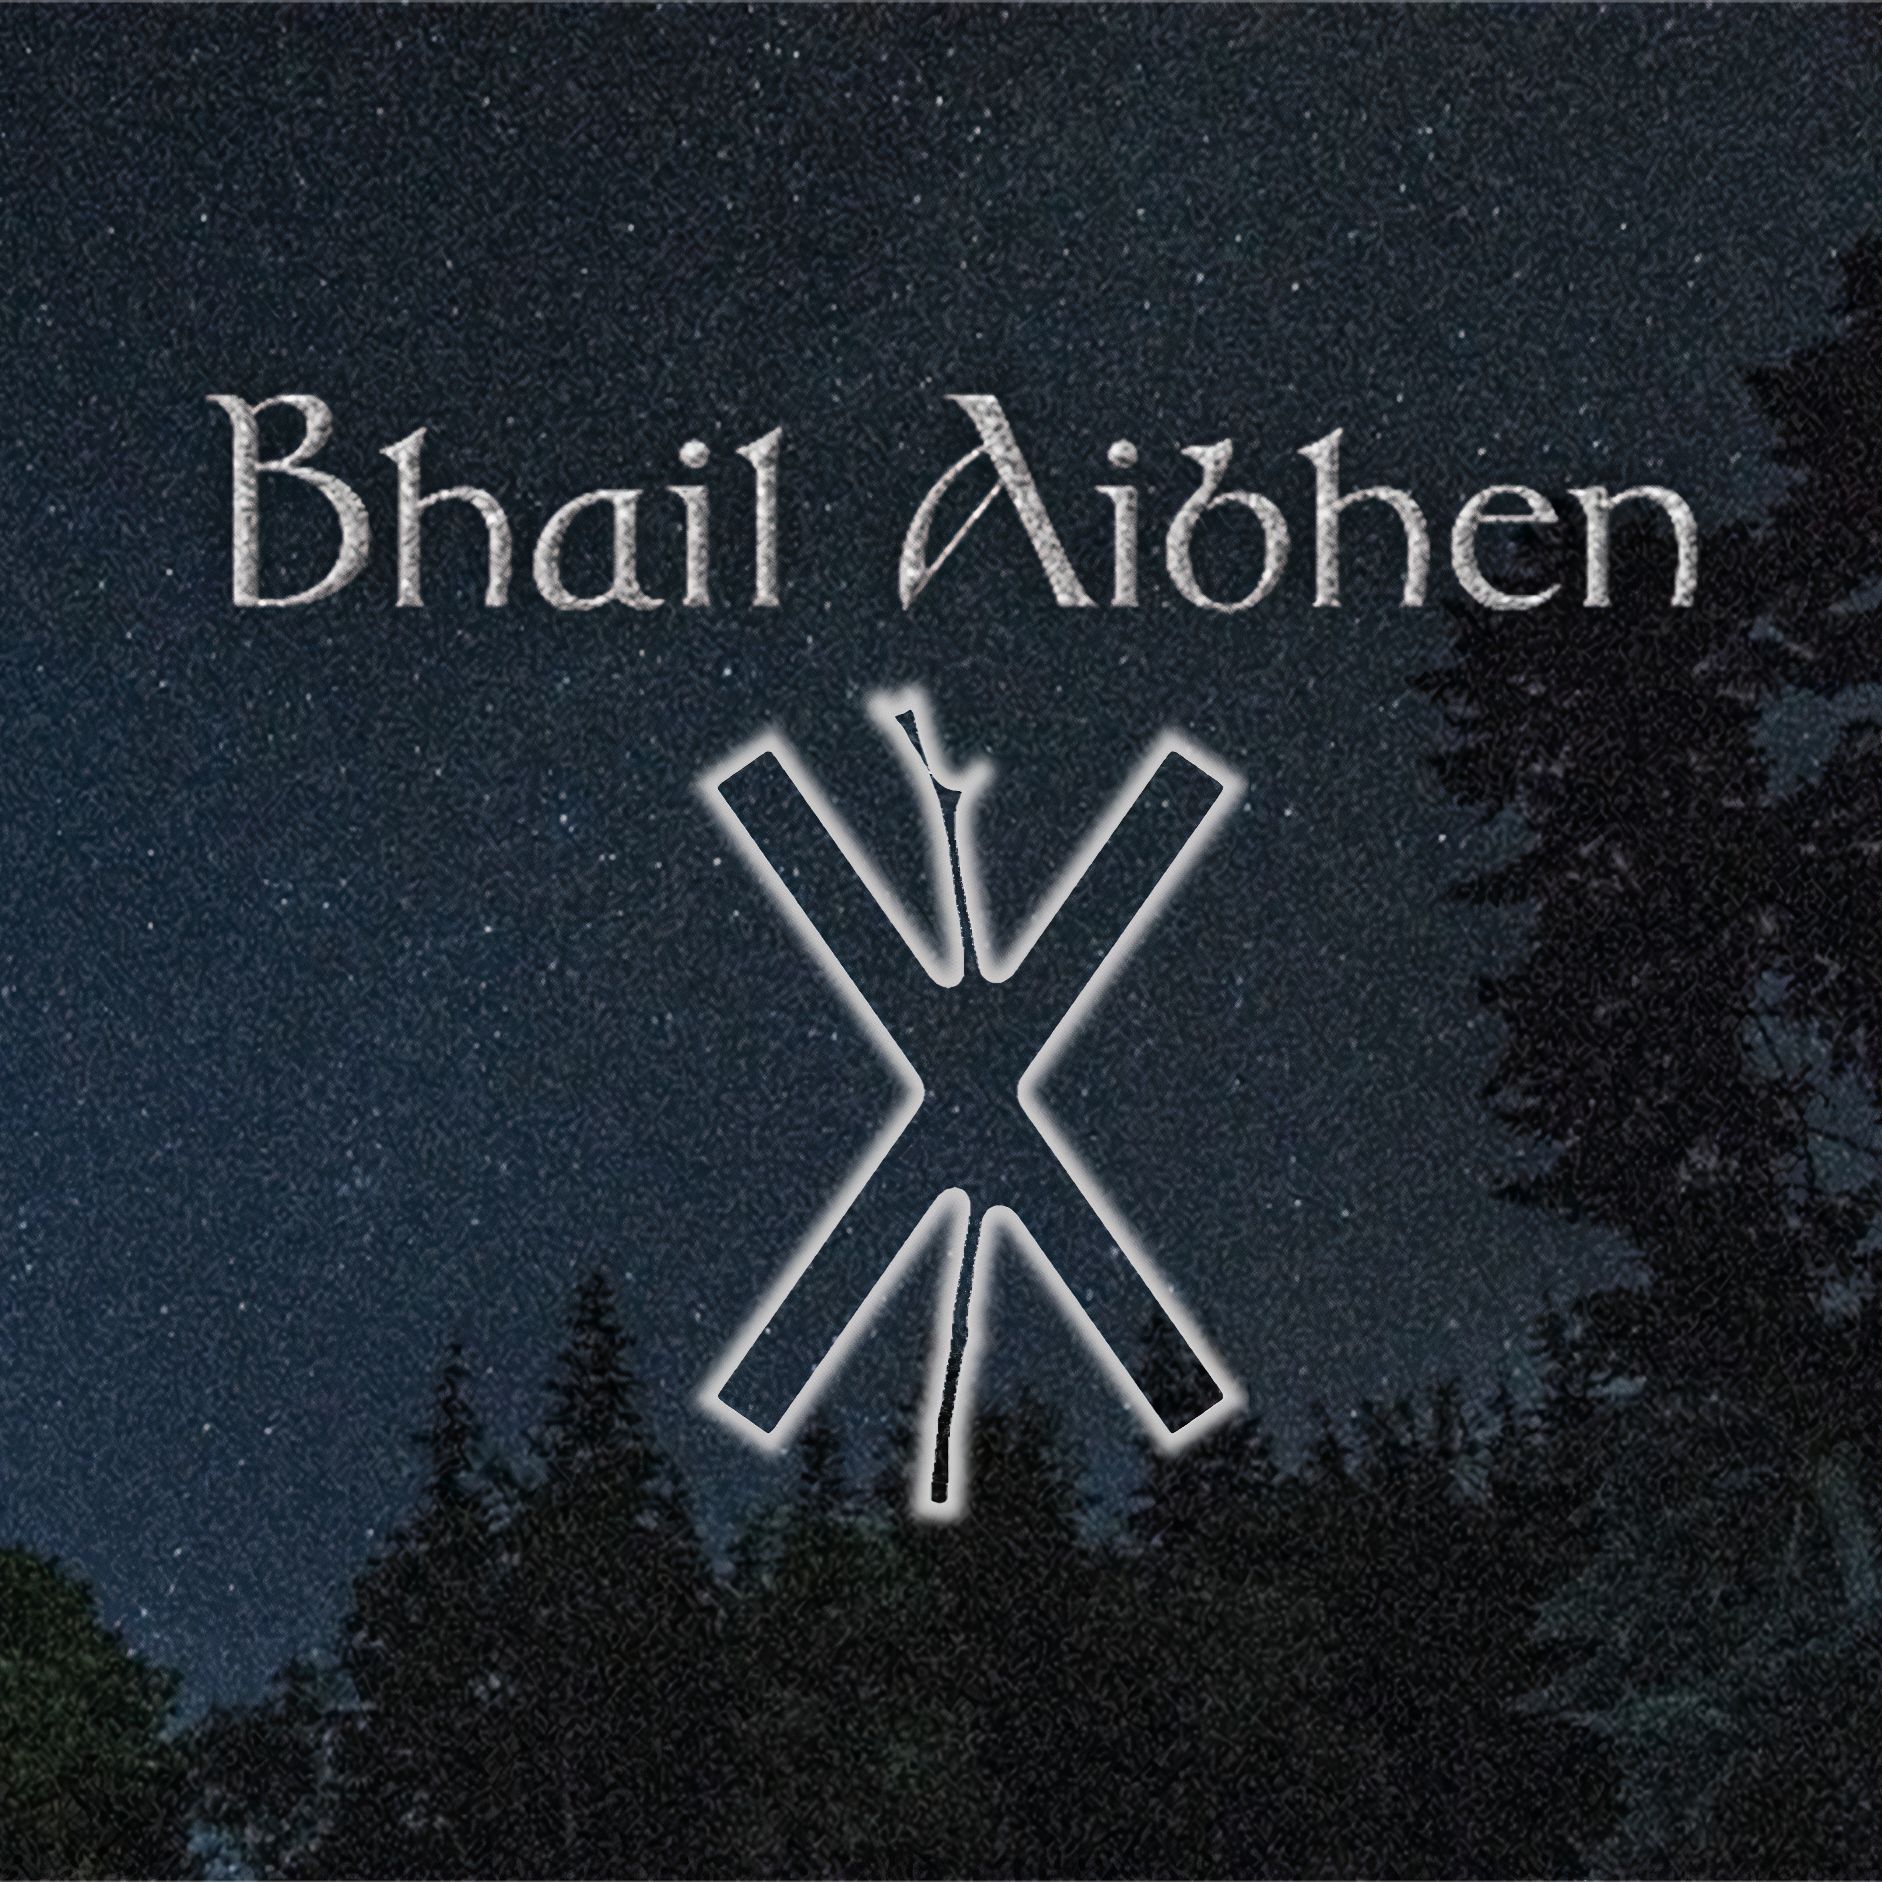 cover art for Bhail Aibhen - the Free Fantasy Audiobook 1.4.1. Creagan bribes the Ard